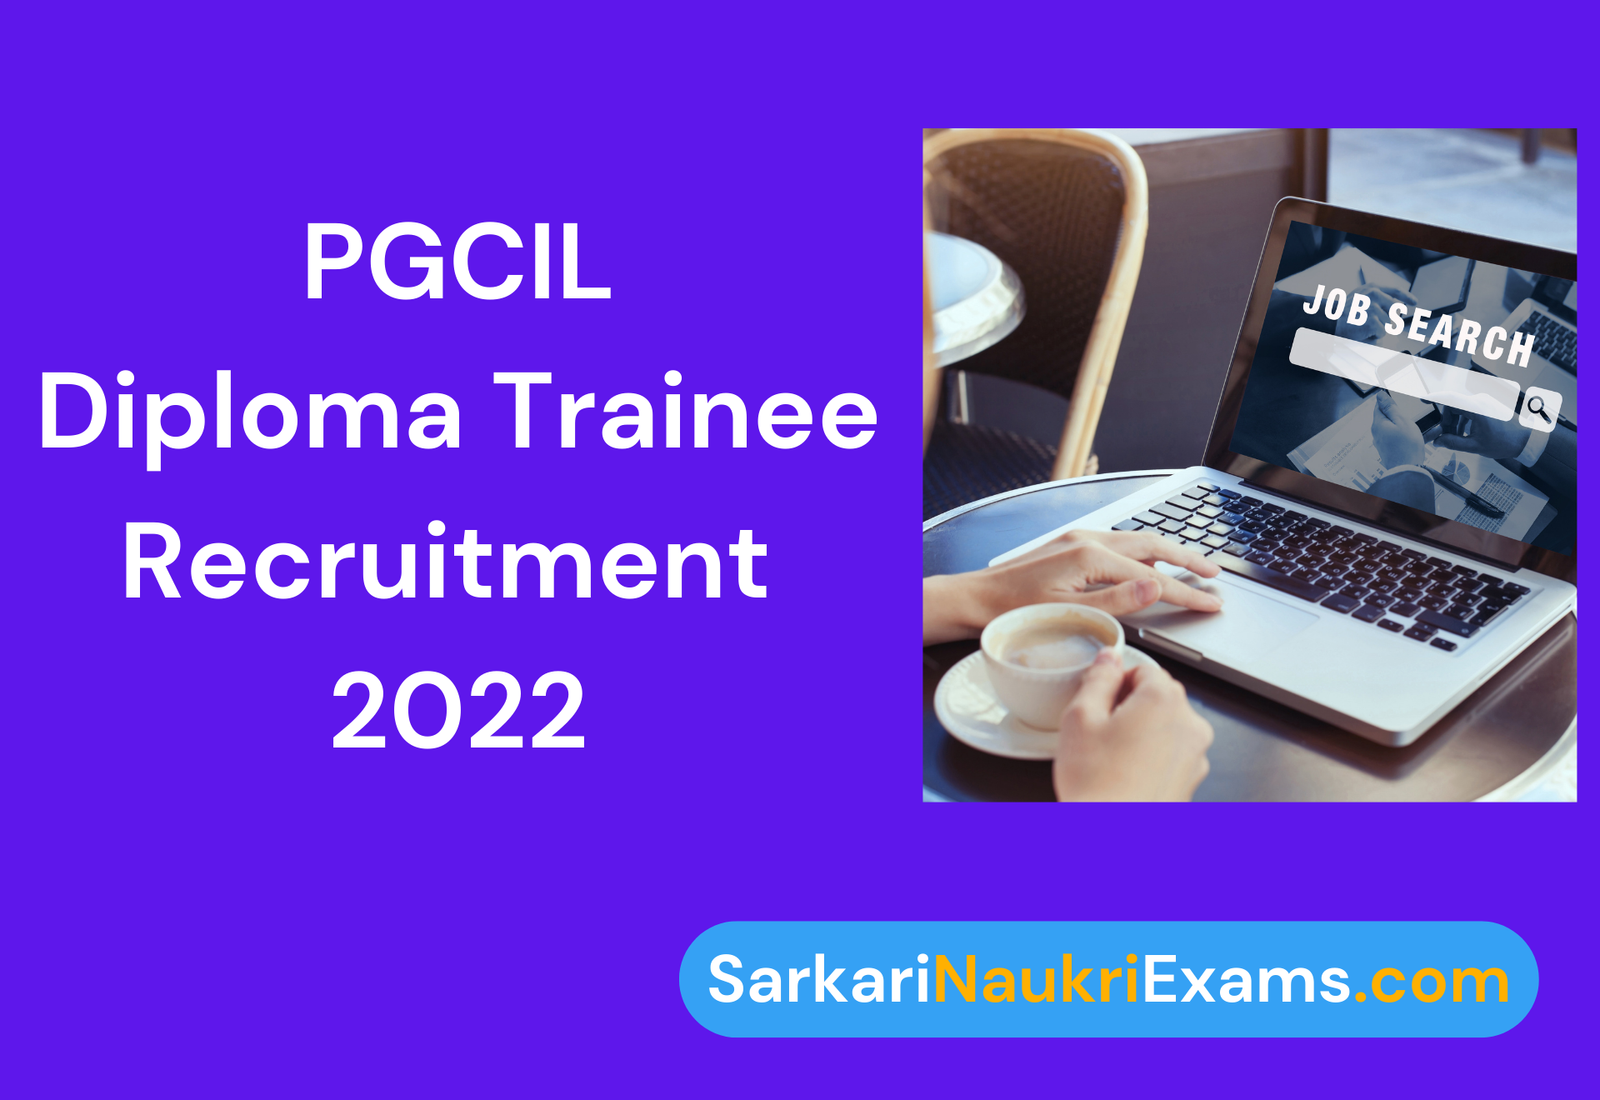 PGCIL Diploma Trainee Recruitment Form 2022 | New Vacancy Apply Online